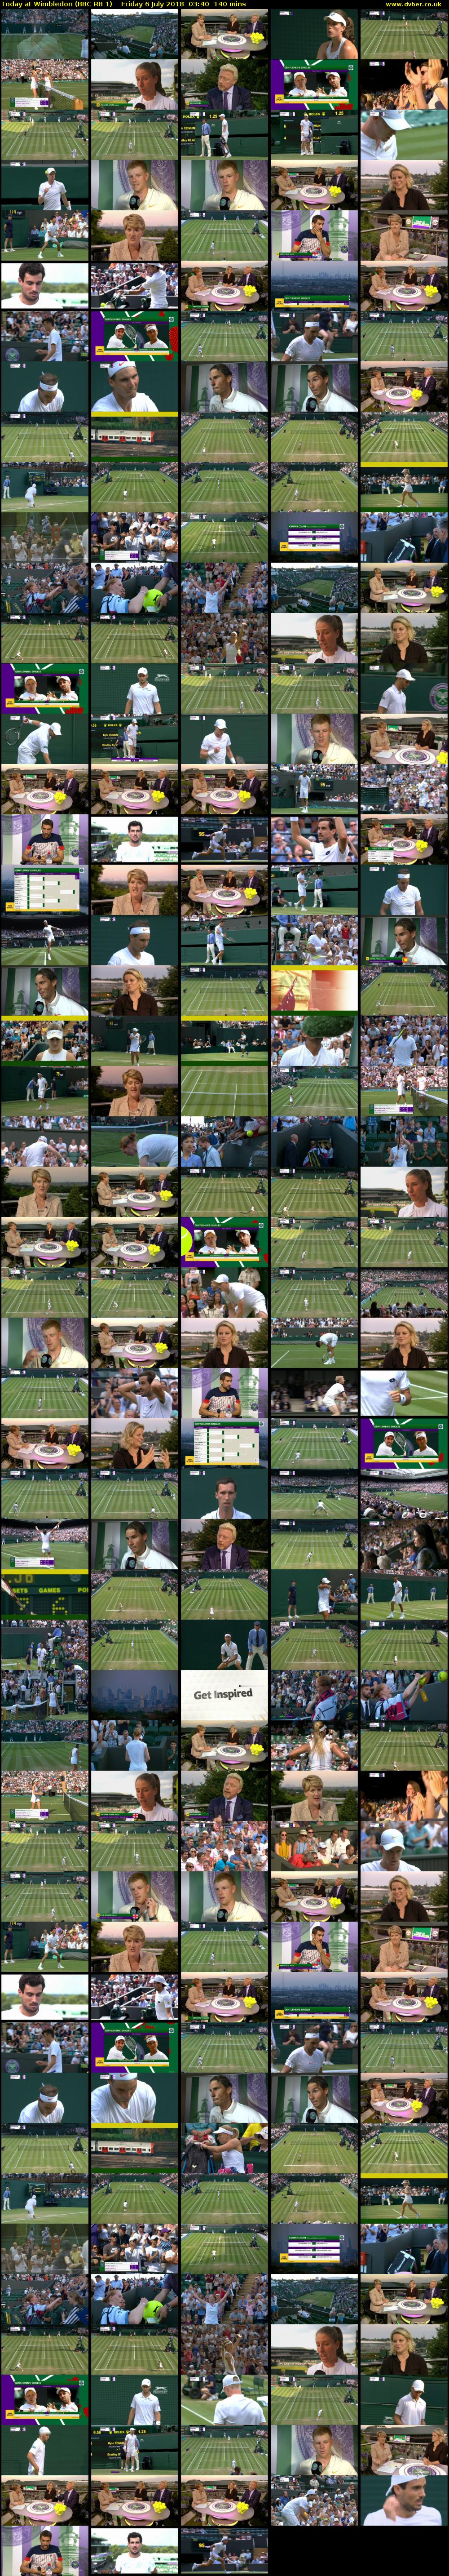 Today at Wimbledon (BBC RB 1) Friday 6 July 2018 03:40 - 06:00